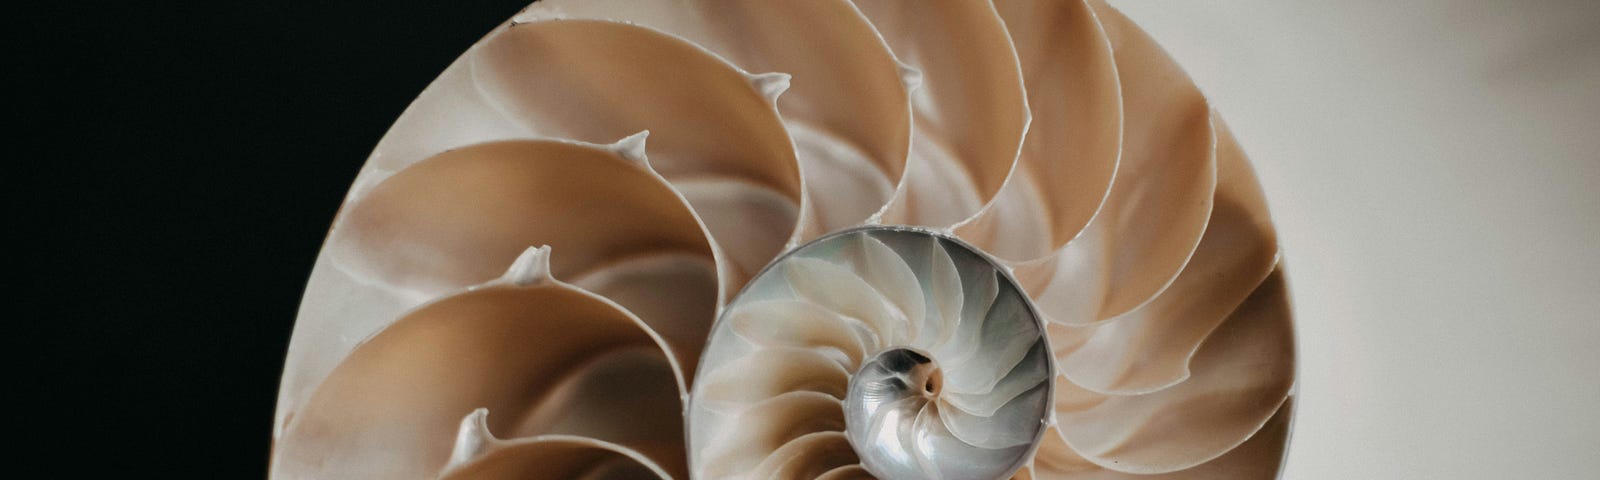 spiral in a shell with a background divided, half black, half white